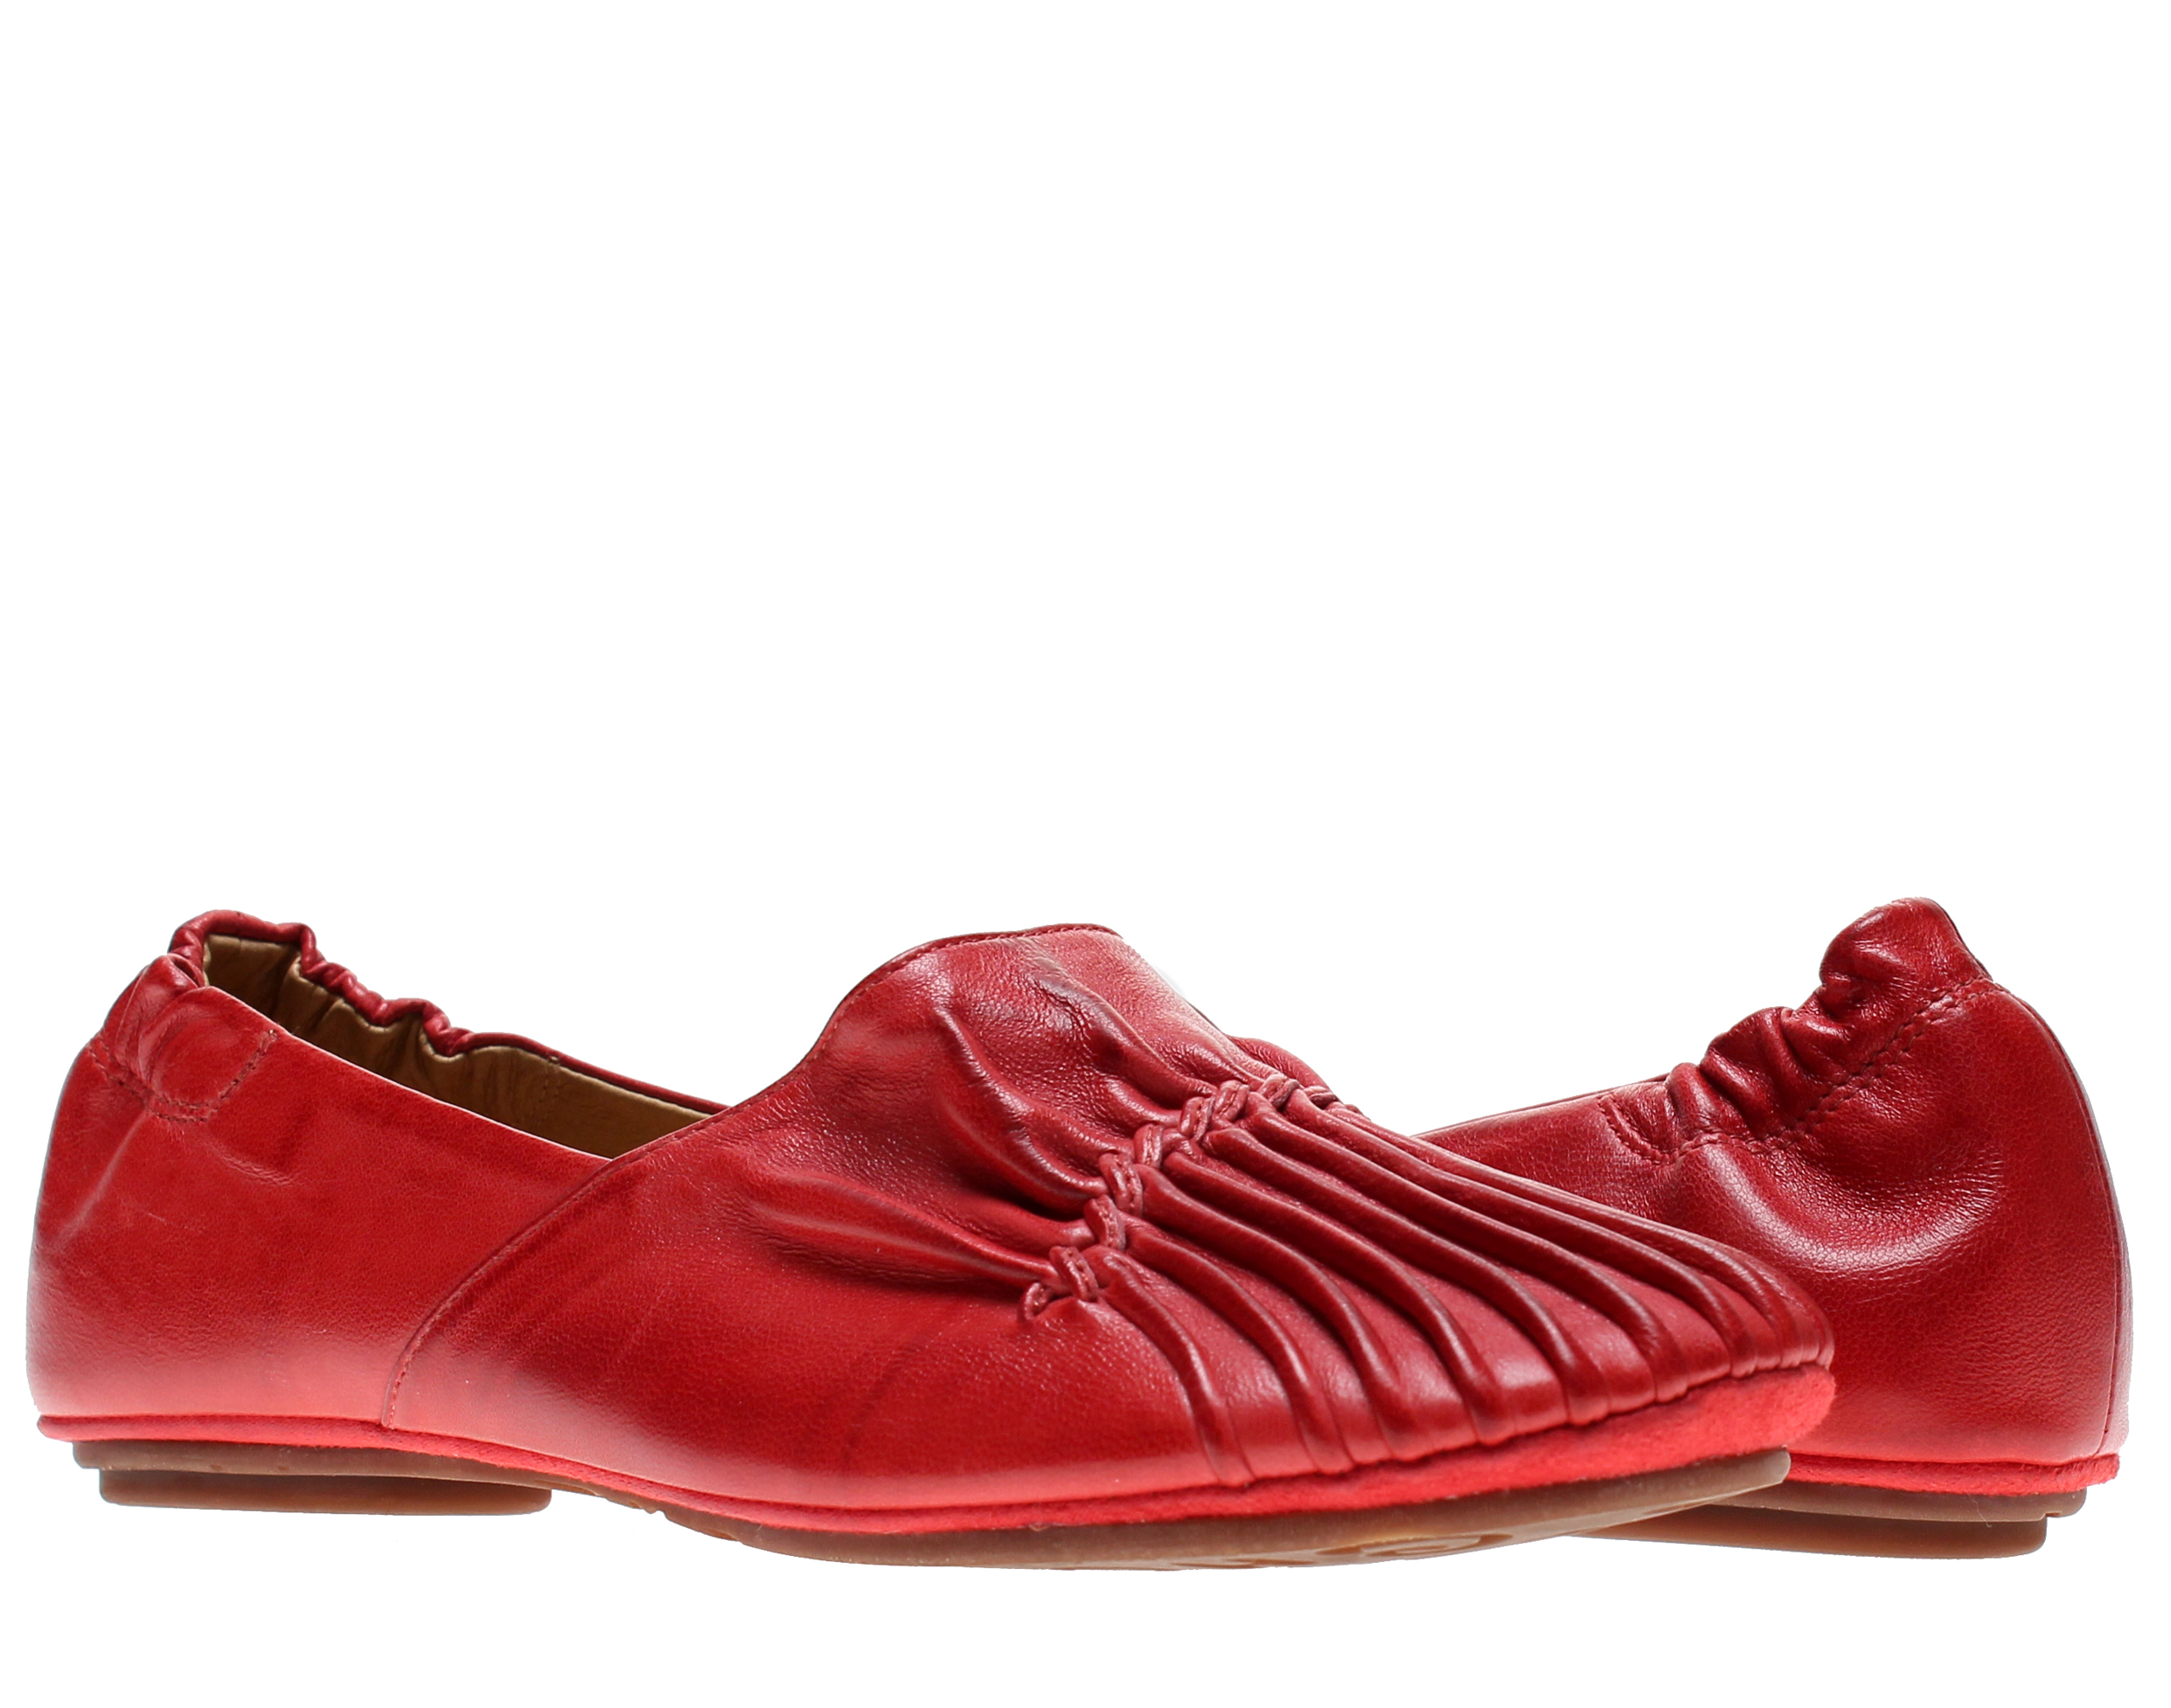 red moccasin shoes